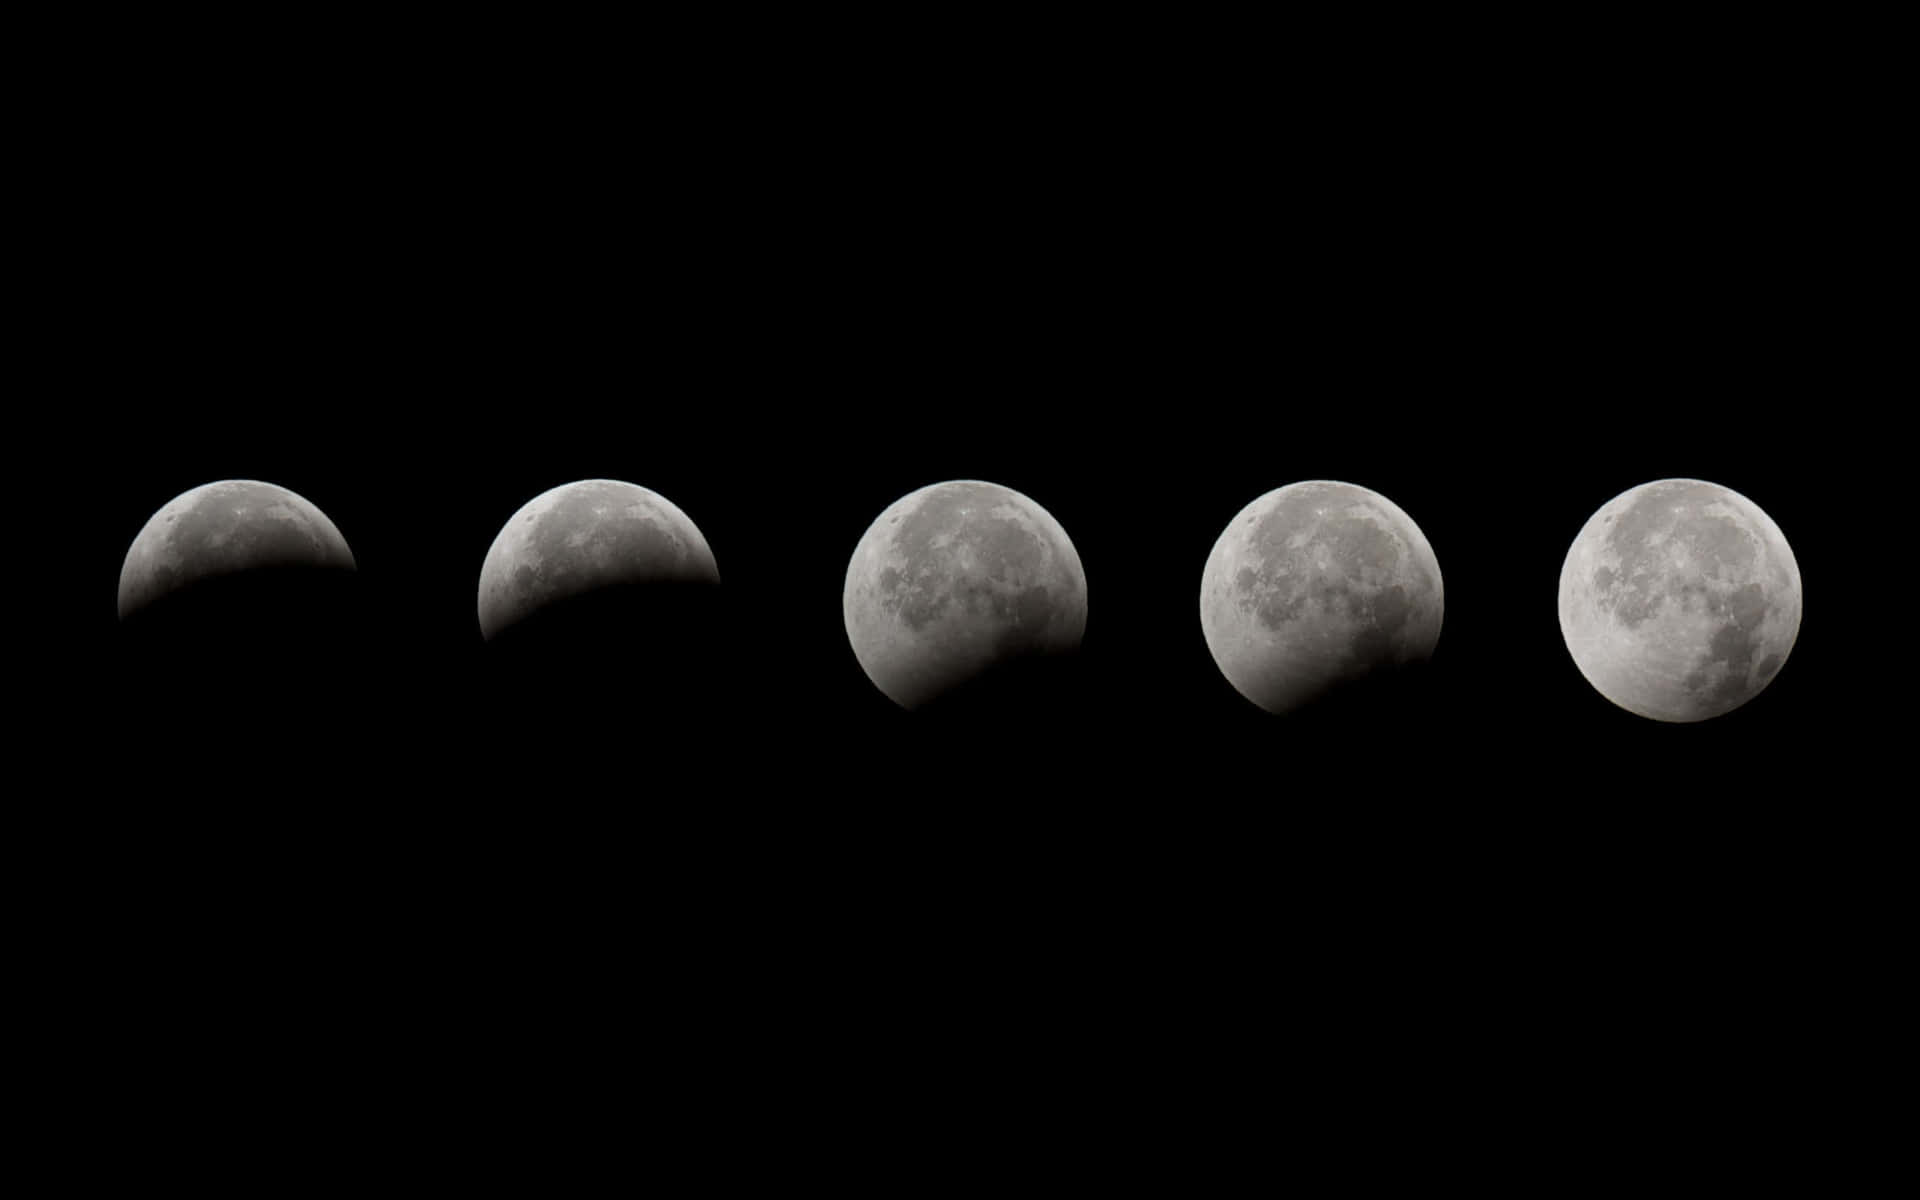 Moon Phases Chart: A High-Quality Image of All Moon Phases